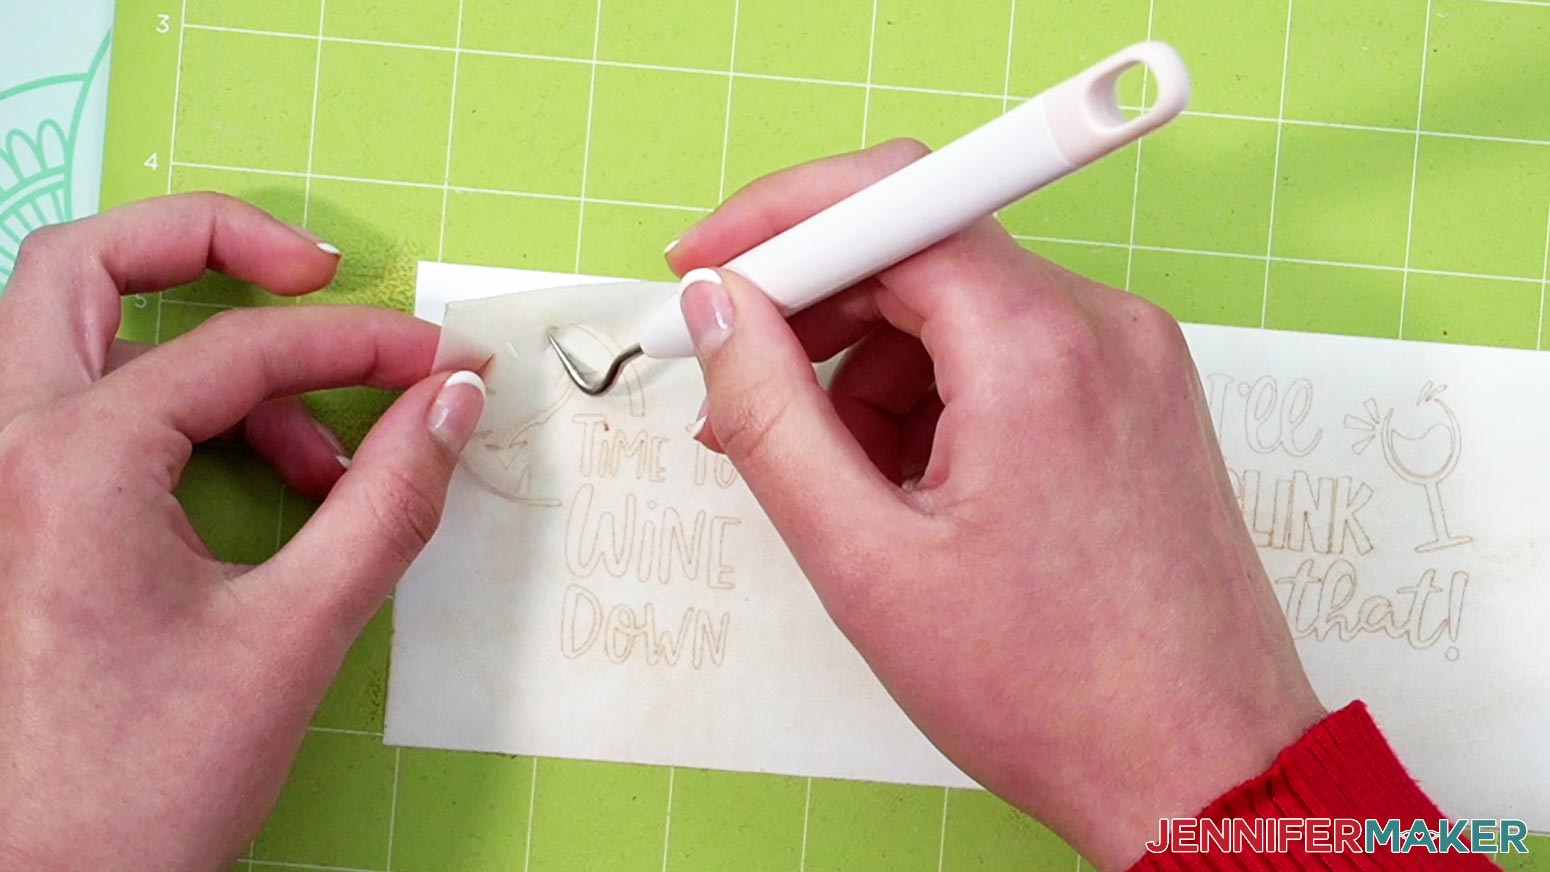 Use a weeding tool to pull away the excess vinyl carefully.